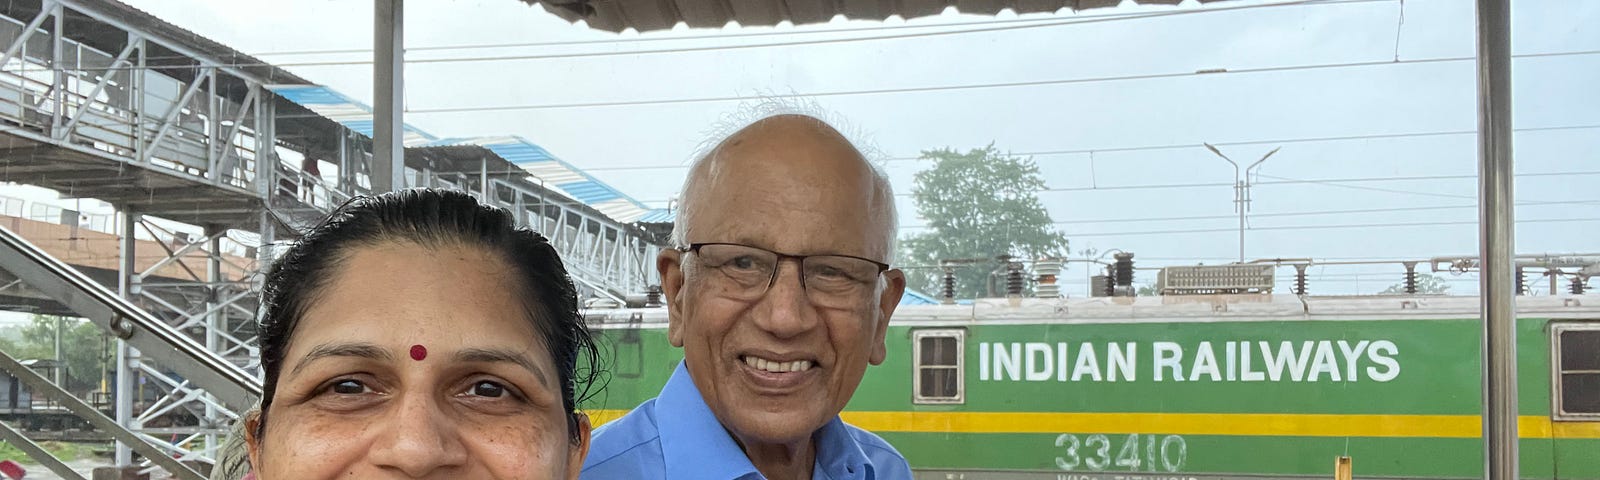 Selfie of the author, a woman in a green dress and grey scarf, with an older gentleman in a blue shirt, at a railway platform. There is an Indian Railways electric engine in the background. A railway platform overbridge is also visible in the background.